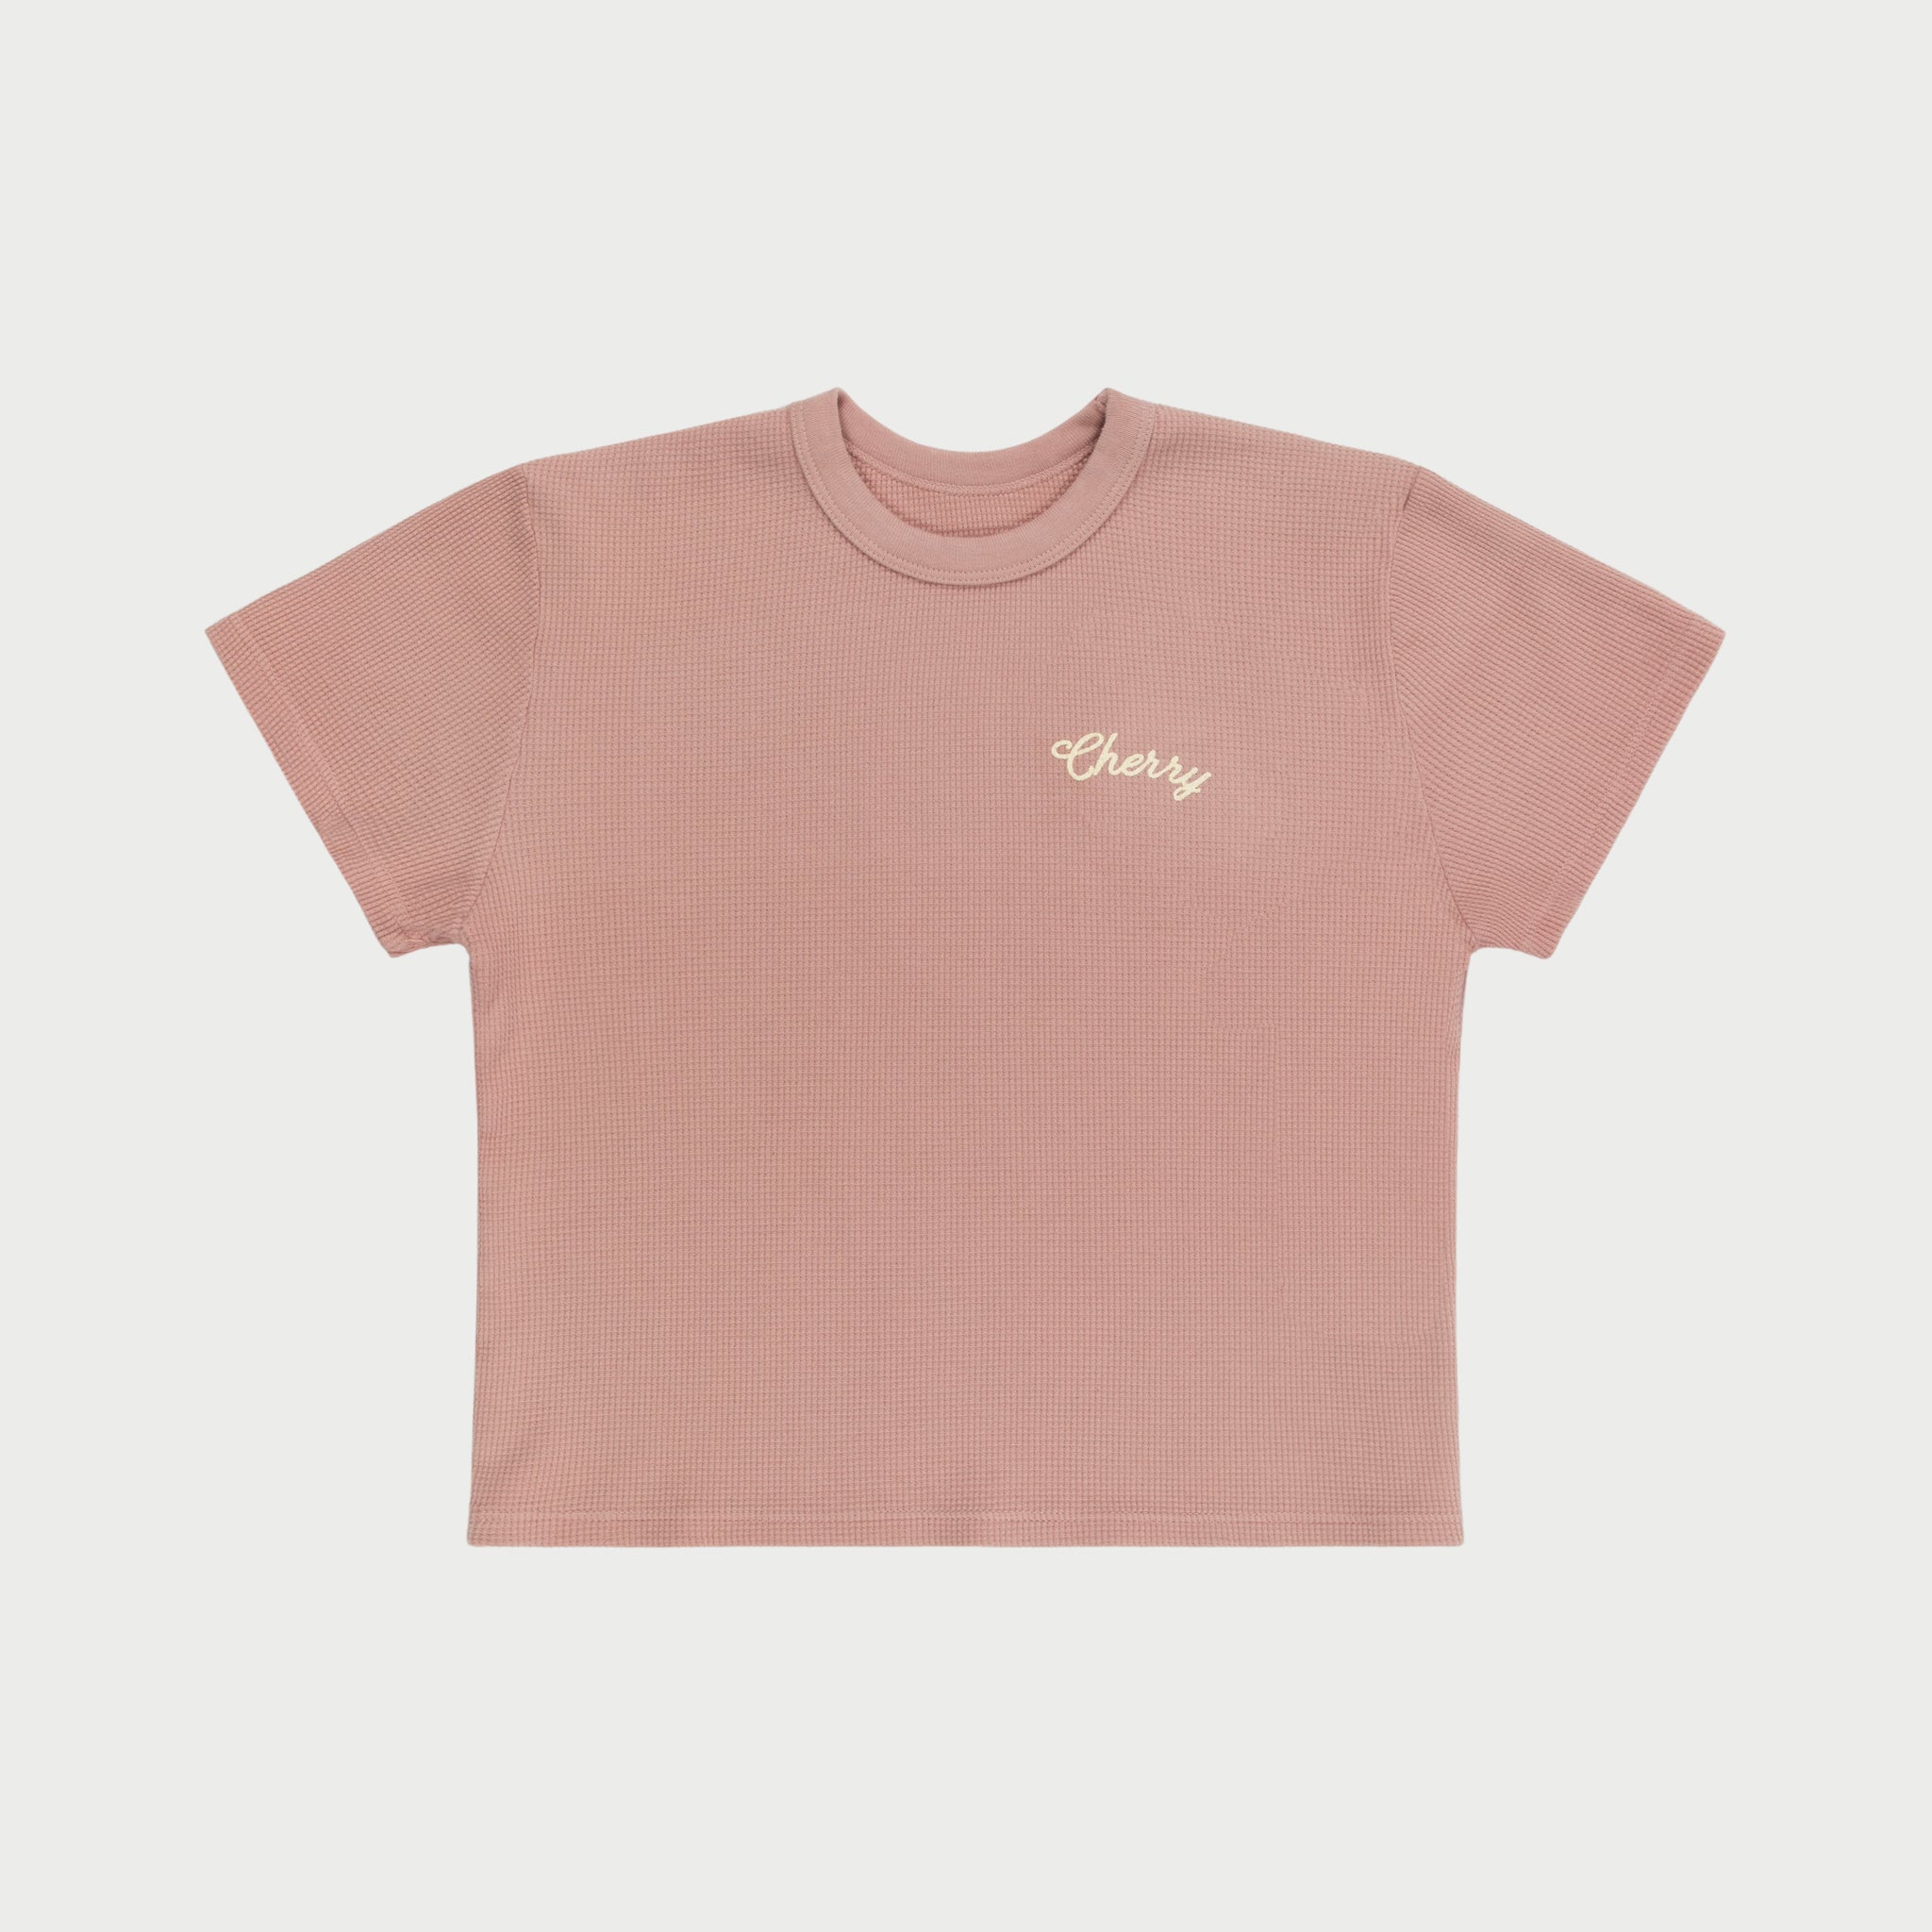 Built to Love Thermal Baby Tee (Rose)